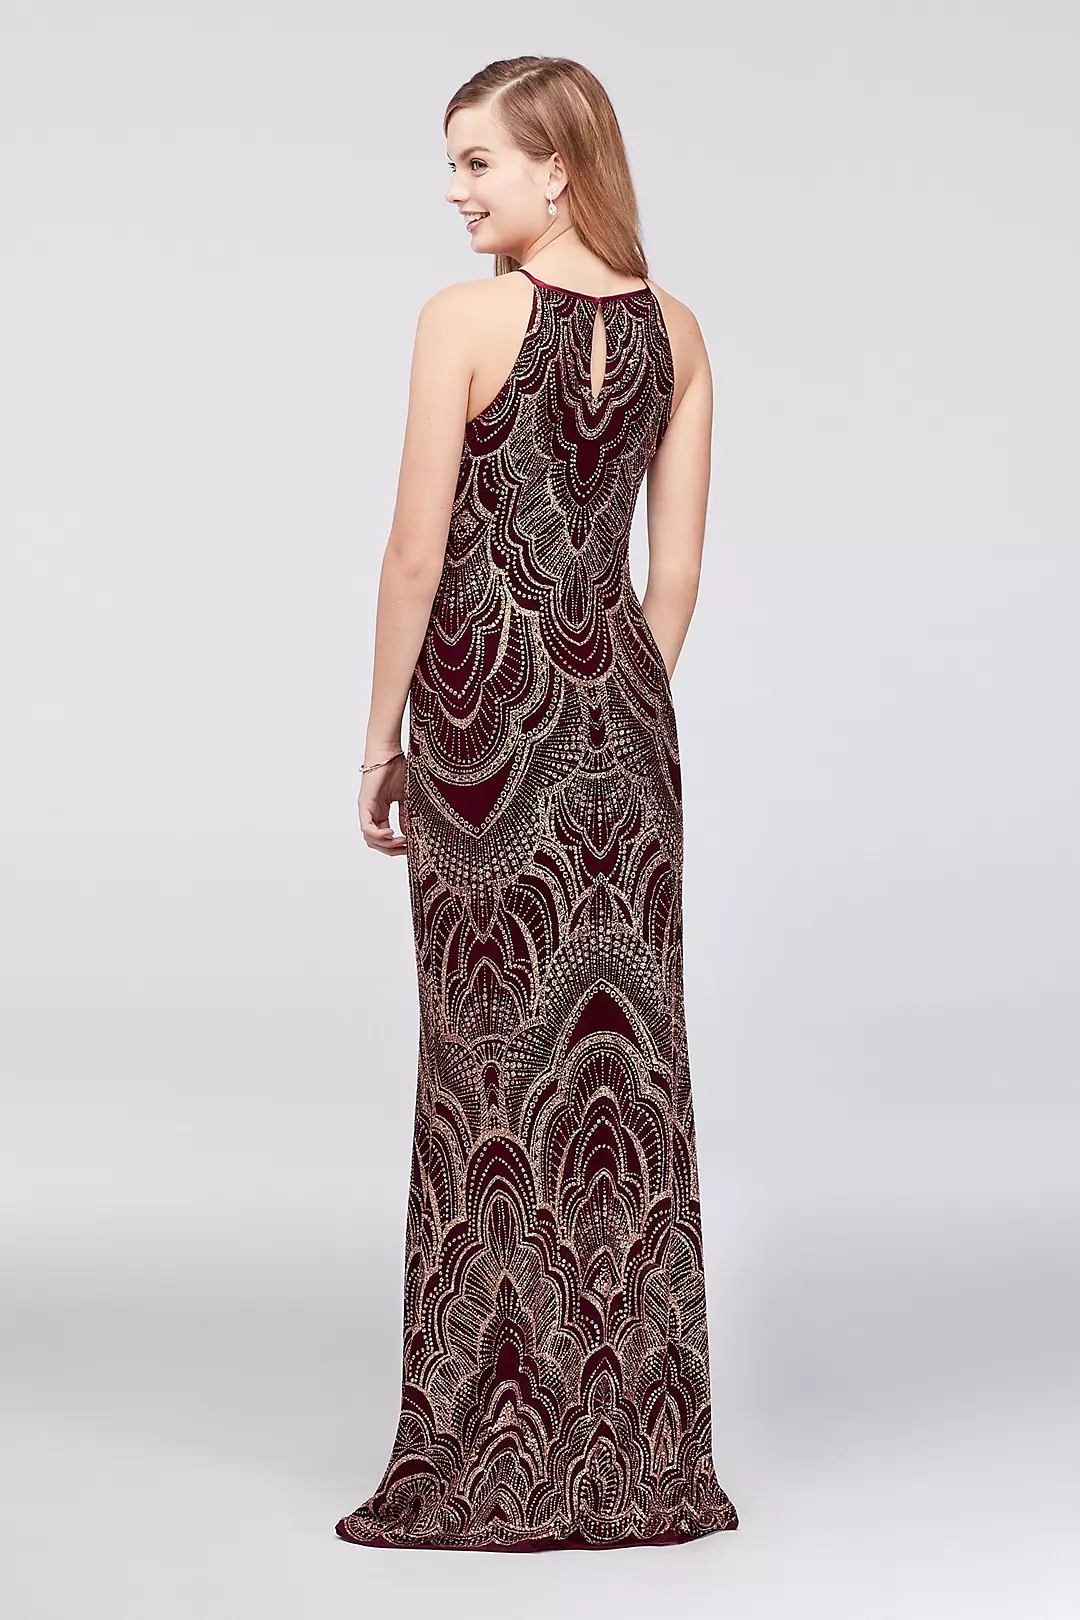 Slinky High-Neck Glitter Print Gown Image 2